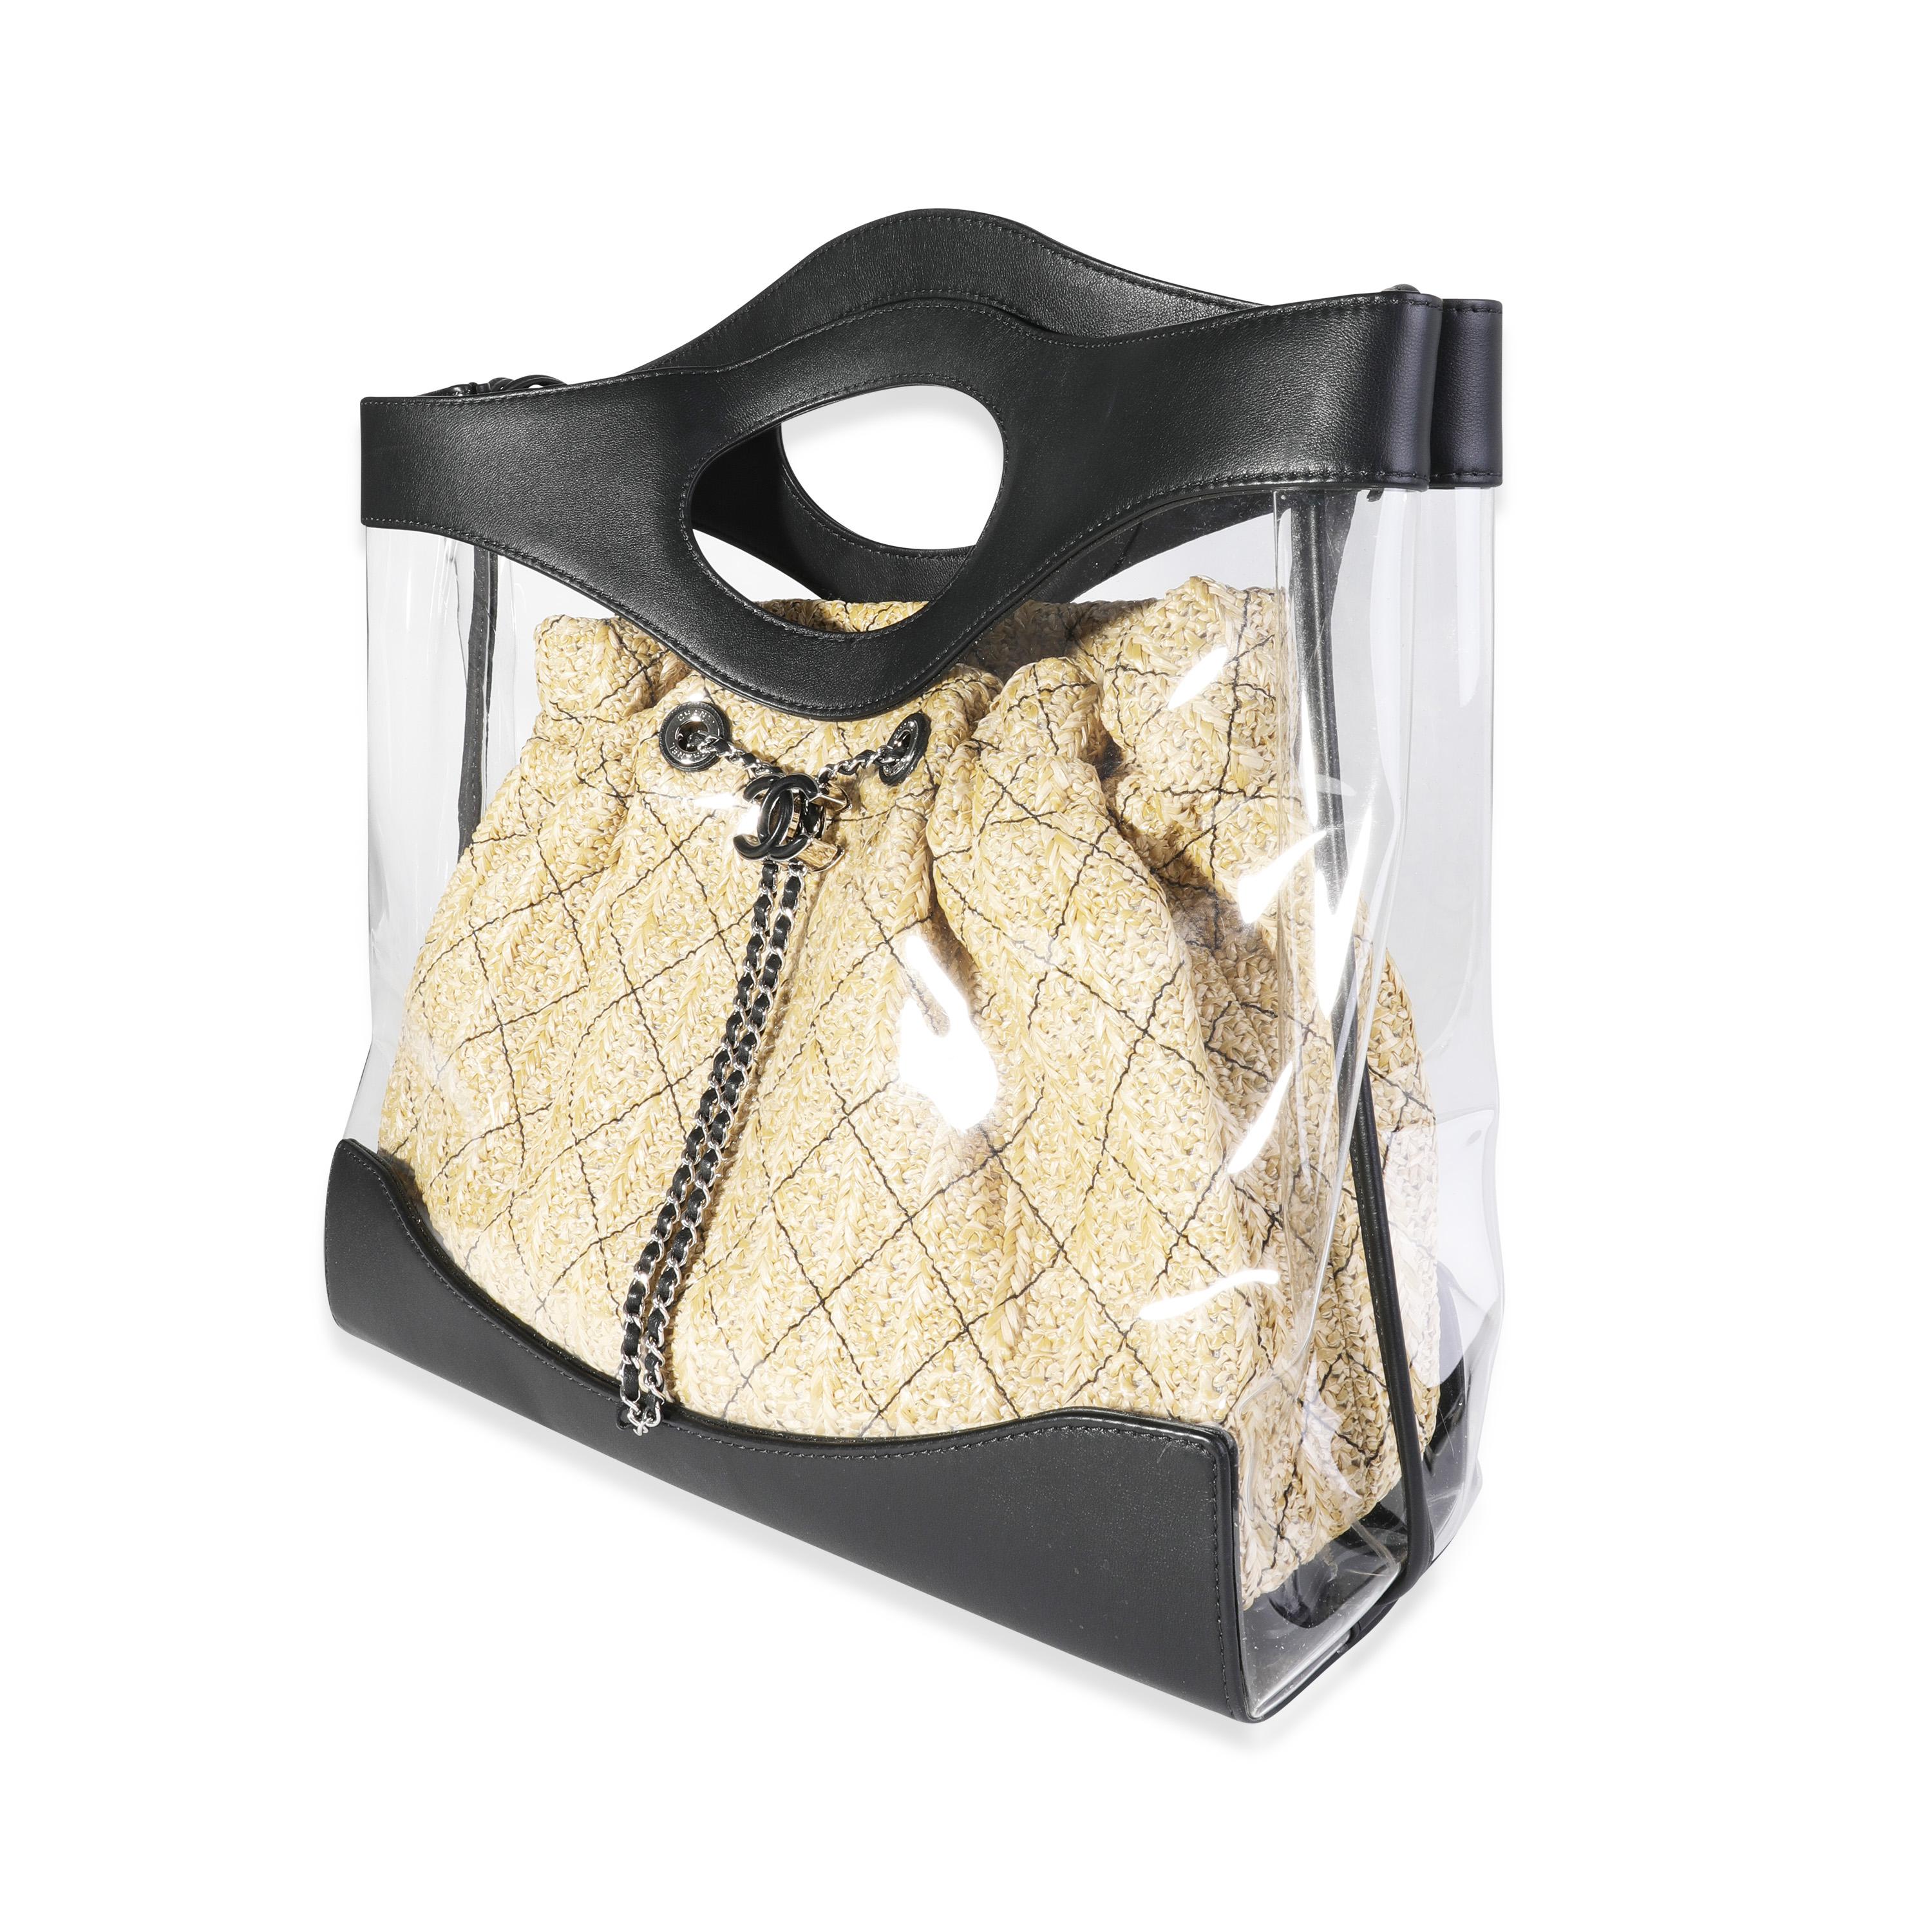 Listing Title: Chanel PVC & Black Calfskin Raffia Chanel 31 Shopping Tote
SKU: 117668
MSRP: 4400.00
Condition: Pre-owned (3000)
Handbag Condition: Very Good
Condition Comments: Very Good Condition. Plastic on some hardware. Scuffing to corners and